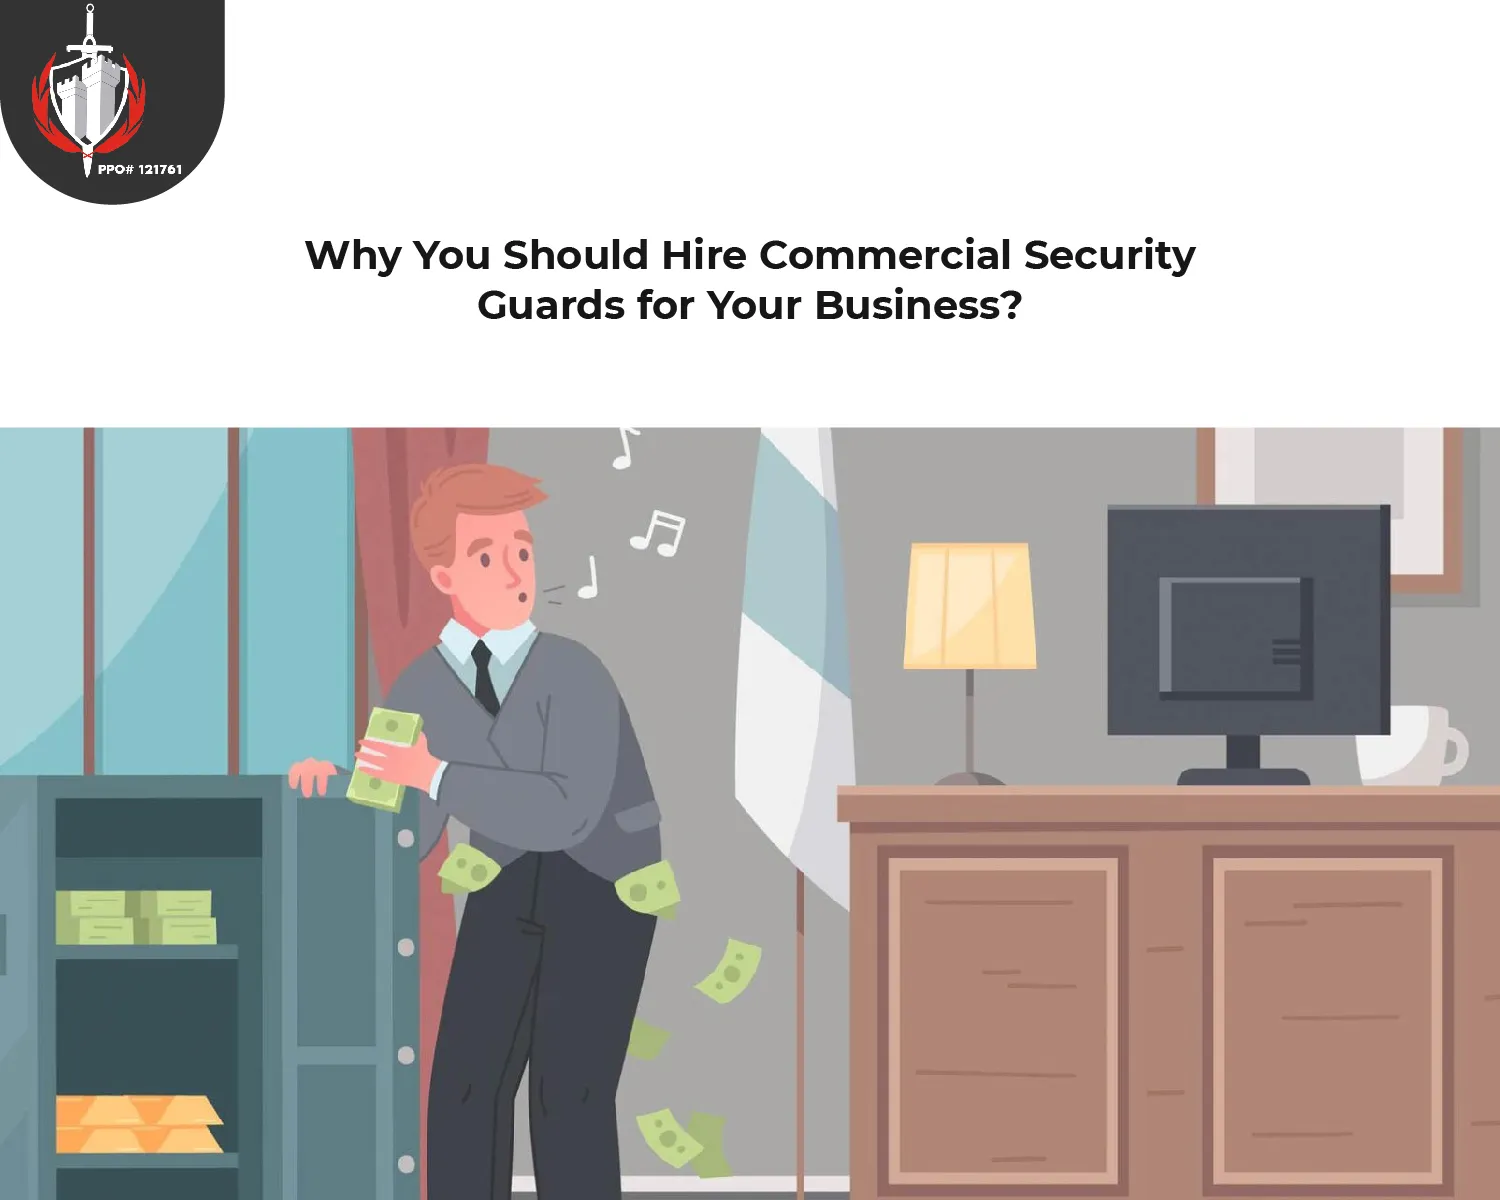 Why You Should Hire Commercial Security Guards for Your Business?